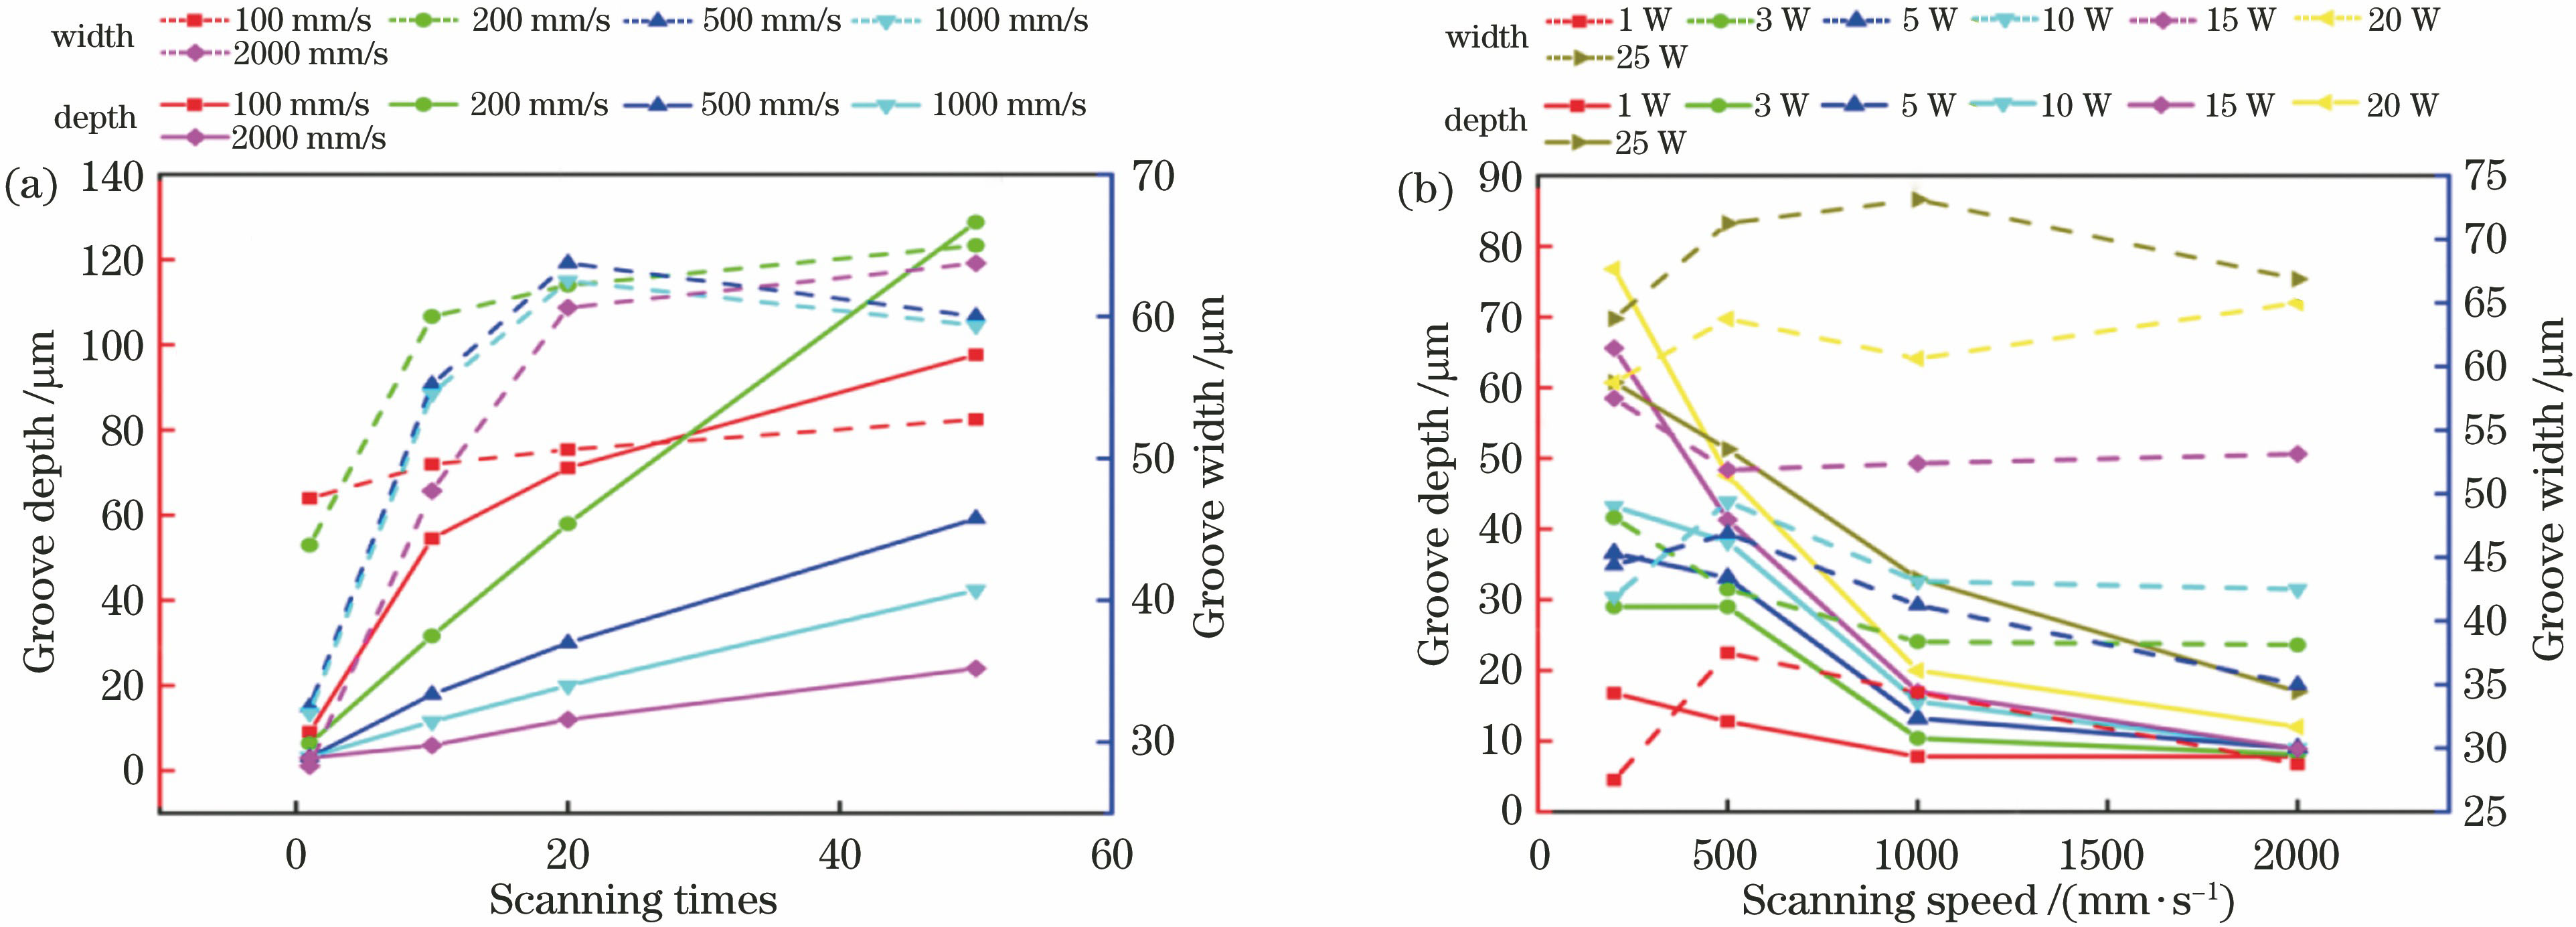 Influence of laser processing parameters on groove depth and width. (a) Influence of scanning speed and scanning times on groove depth and width; (b) influence of laser power and scanning speed on groove depth and width